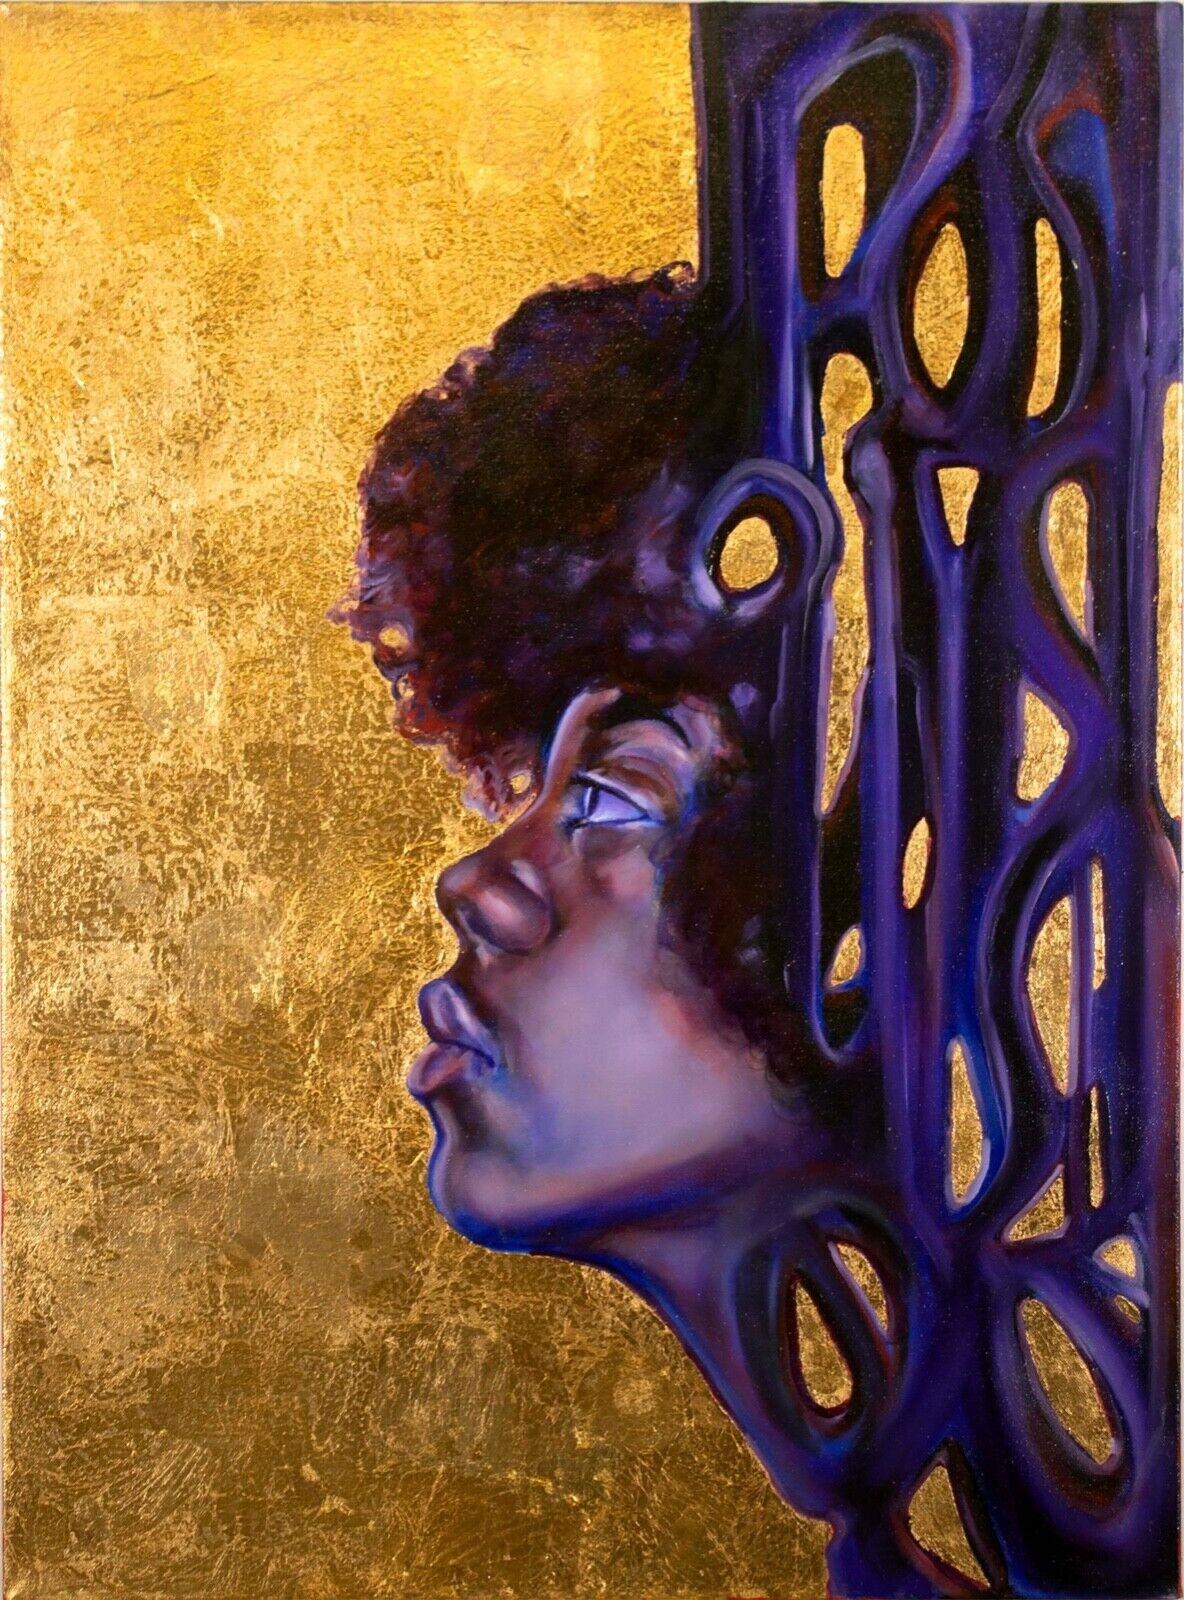 An evocative and powerful oil painting on canvas with copper/gold leaf titled “Lift Every Voice (Diptych)” by Christopher Adams Williams. Created in 2020. A male and female portrait in deep plums and indigo colors emerge from a brilliant gold